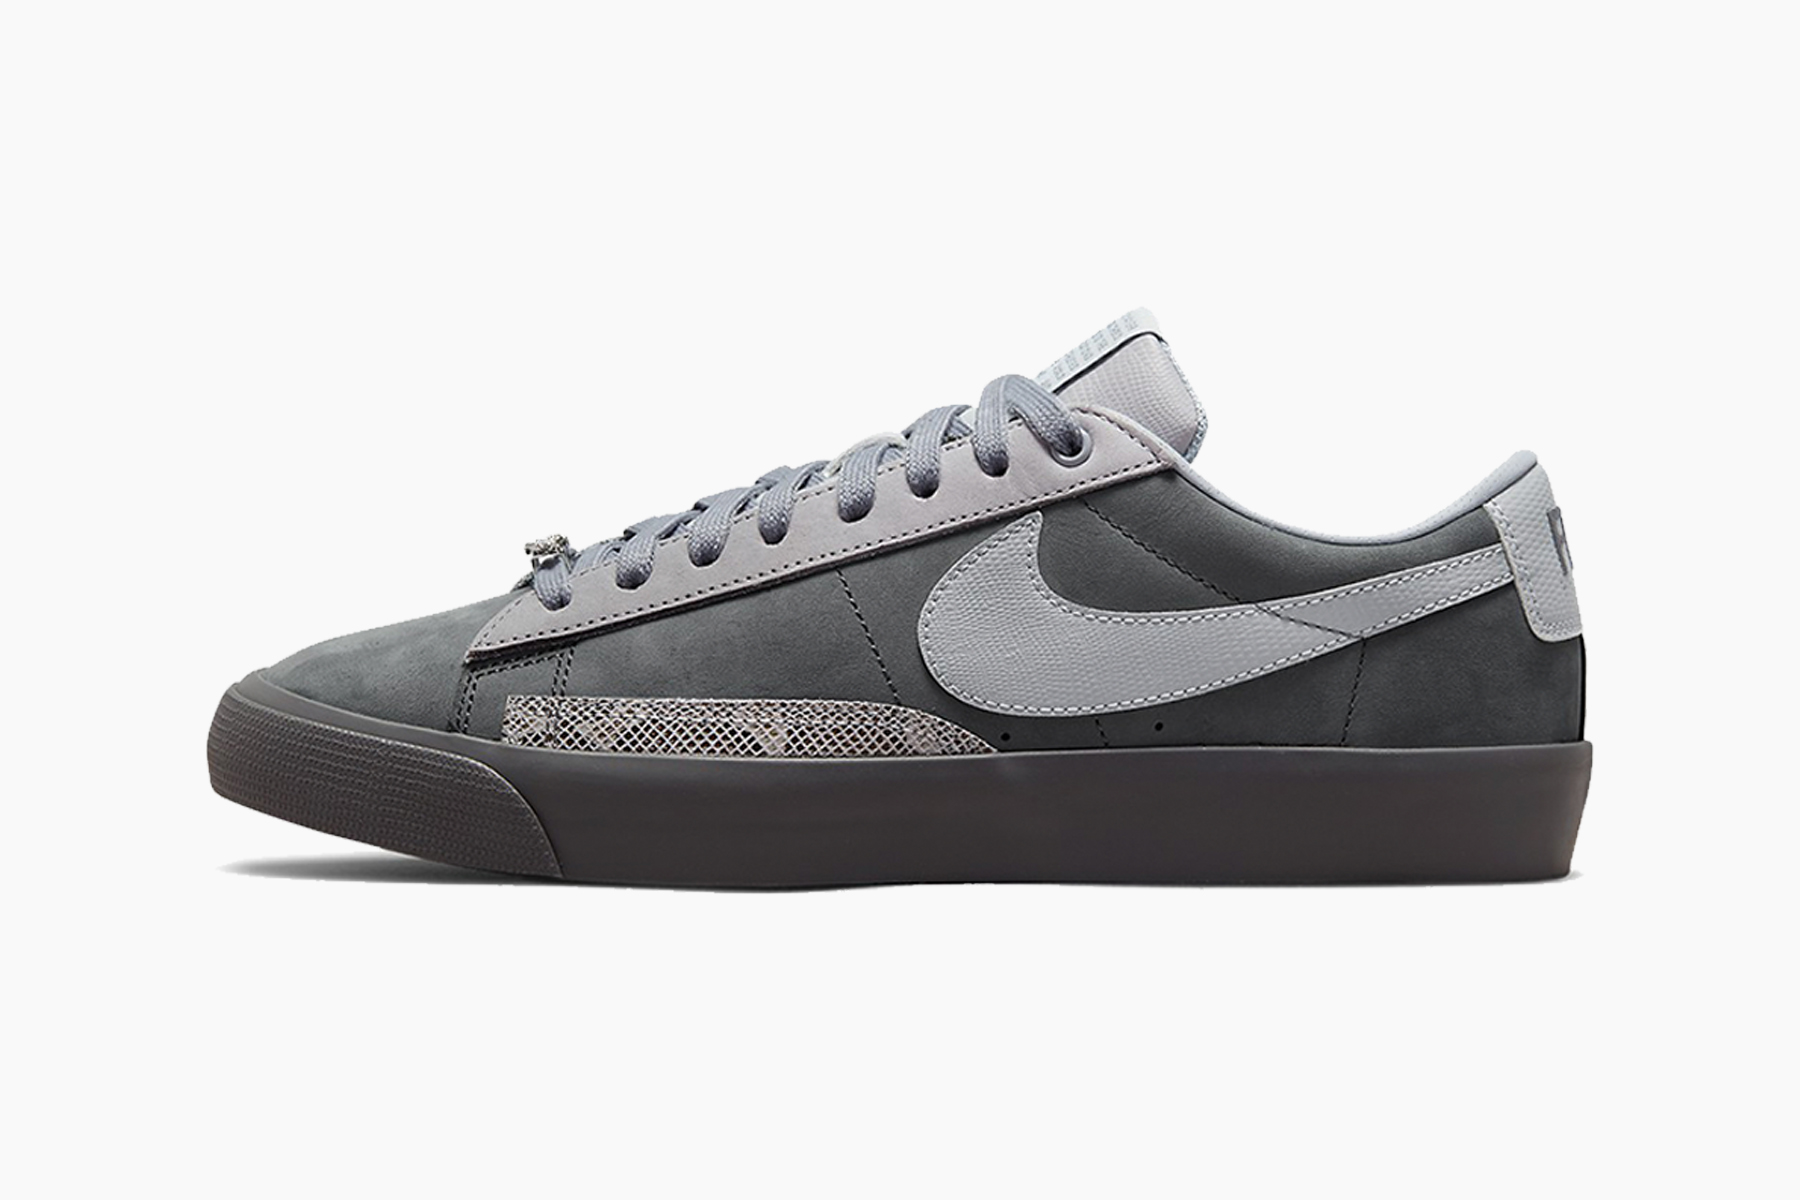 FORTY PERCENT AGAINST RIGHTS x Nike SB Blazer Low